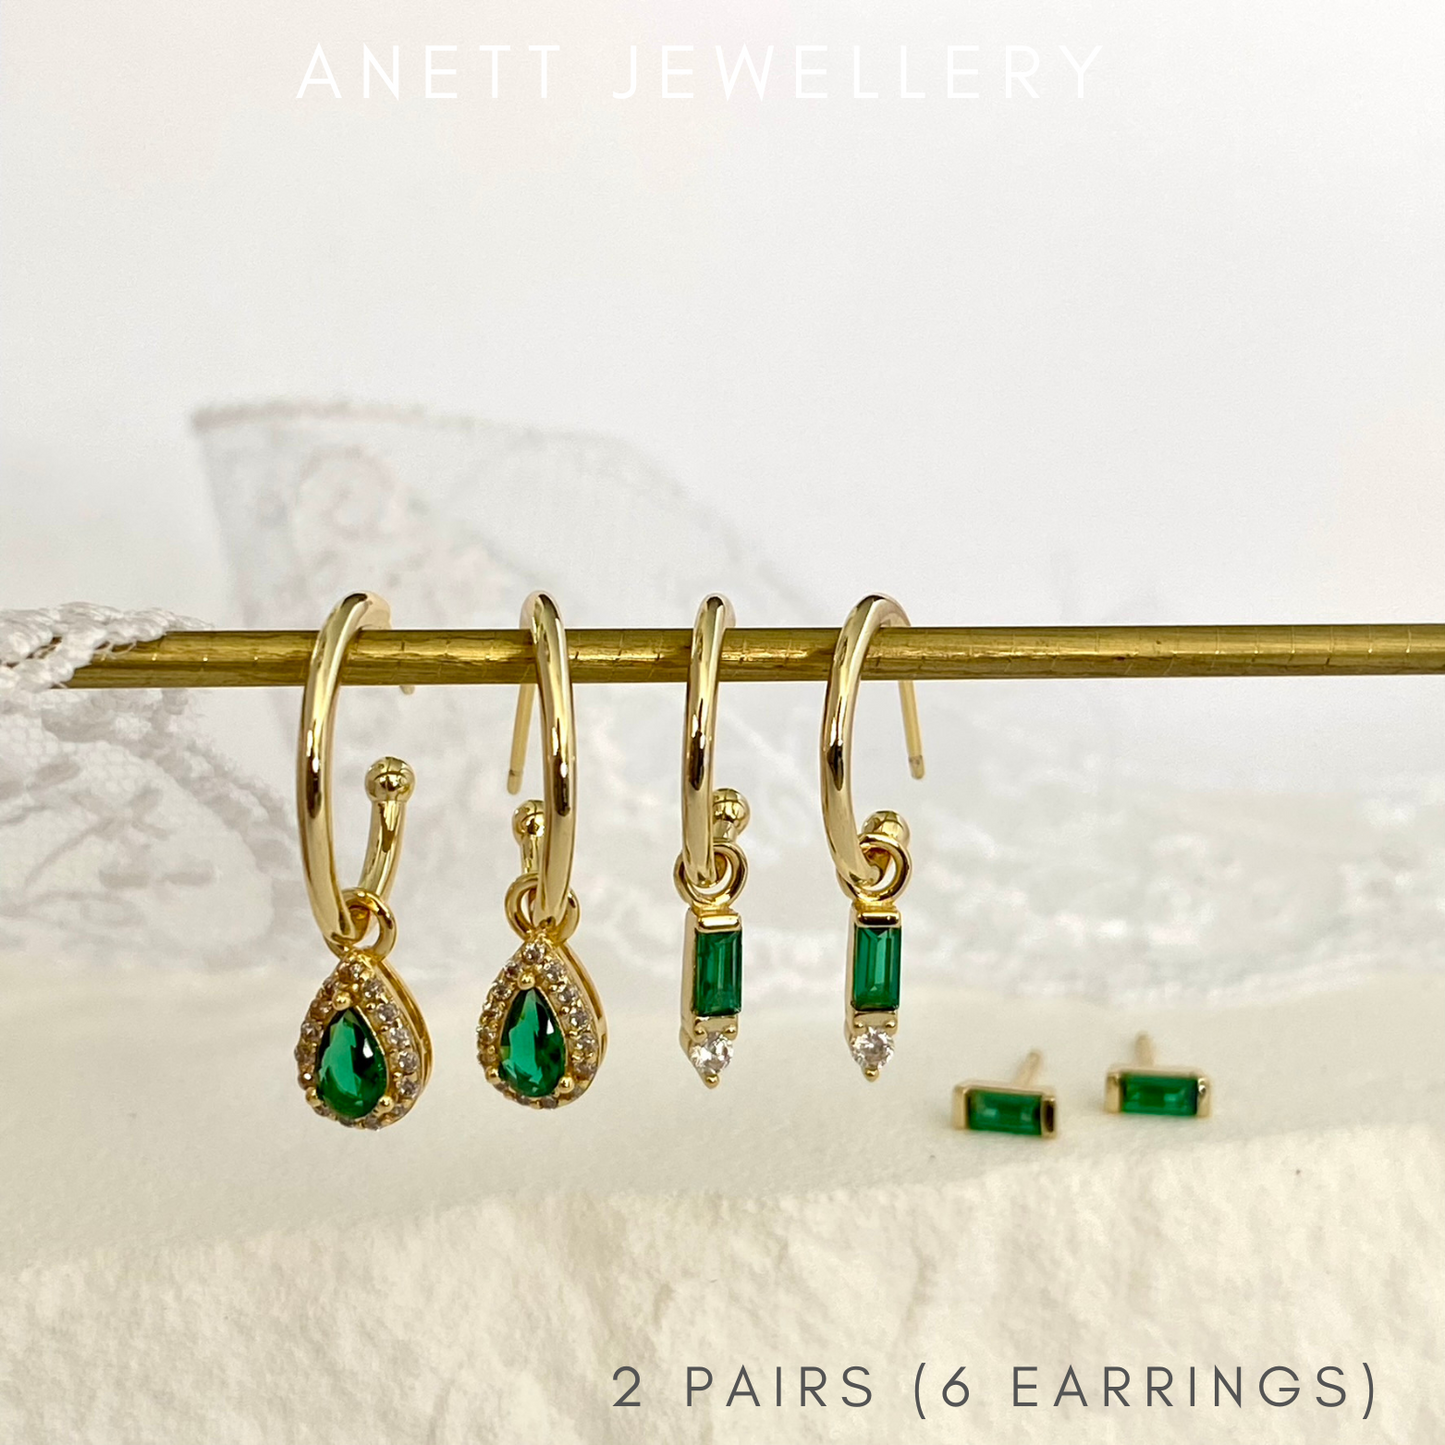 Green Dangly Ear Stack Set, 925 Sterling Silver 3 pieces Gold Earring Set